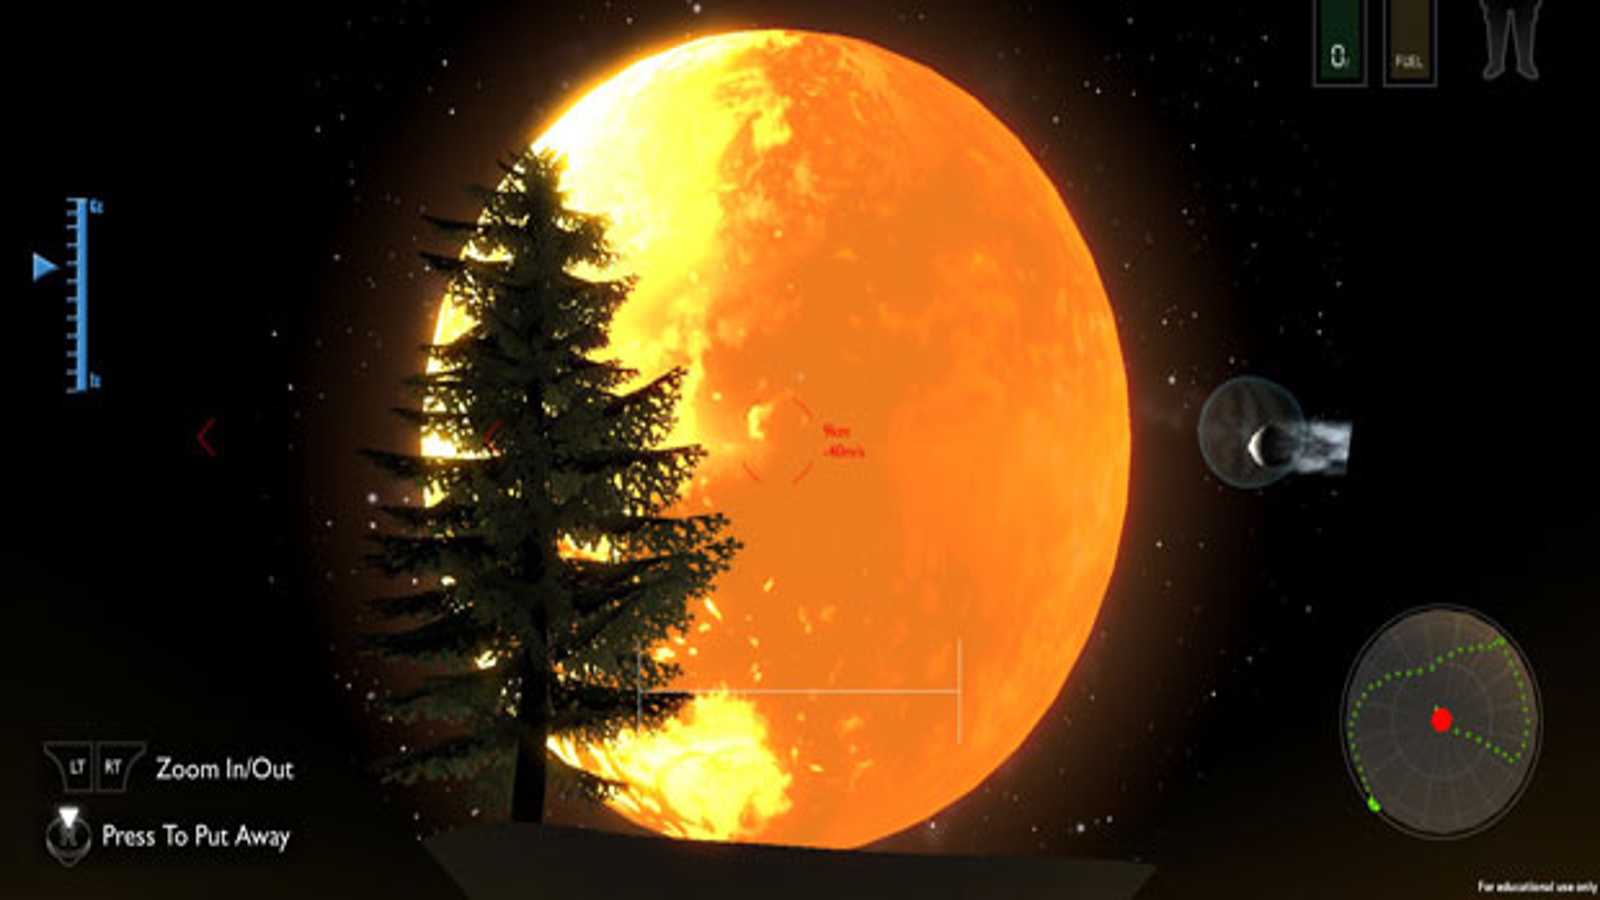 Could the Outer Wilds solar system be imported into KSP? And